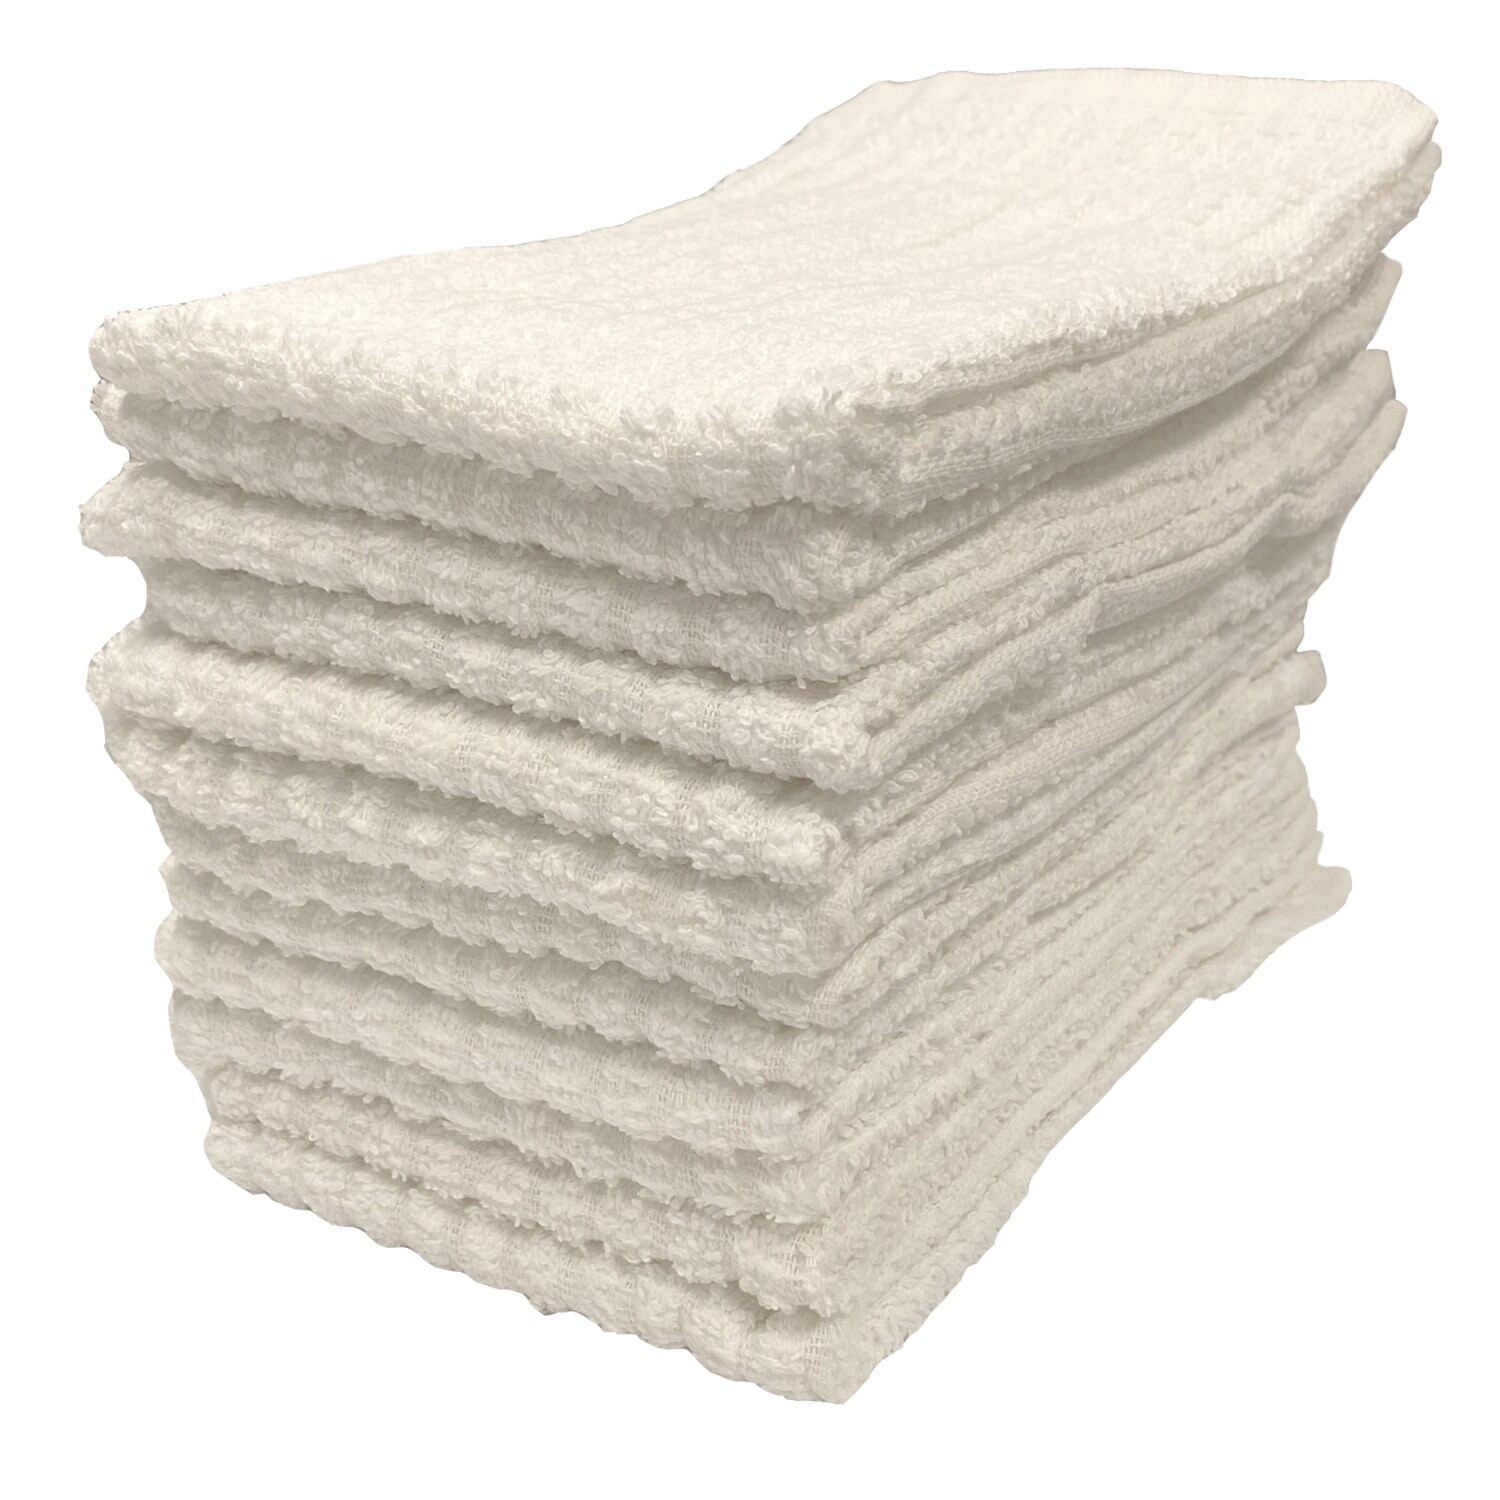 https://ak1.ostkcdn.com/images/products/is/images/direct/802793ce7ef576efa8ee4219f5debb47c98bf314/Premius-12-Pack-Bar-Mop-Kitchen-Towel%2C-100%25-Cotton%2C-White%2C-16x19-Inches.jpg